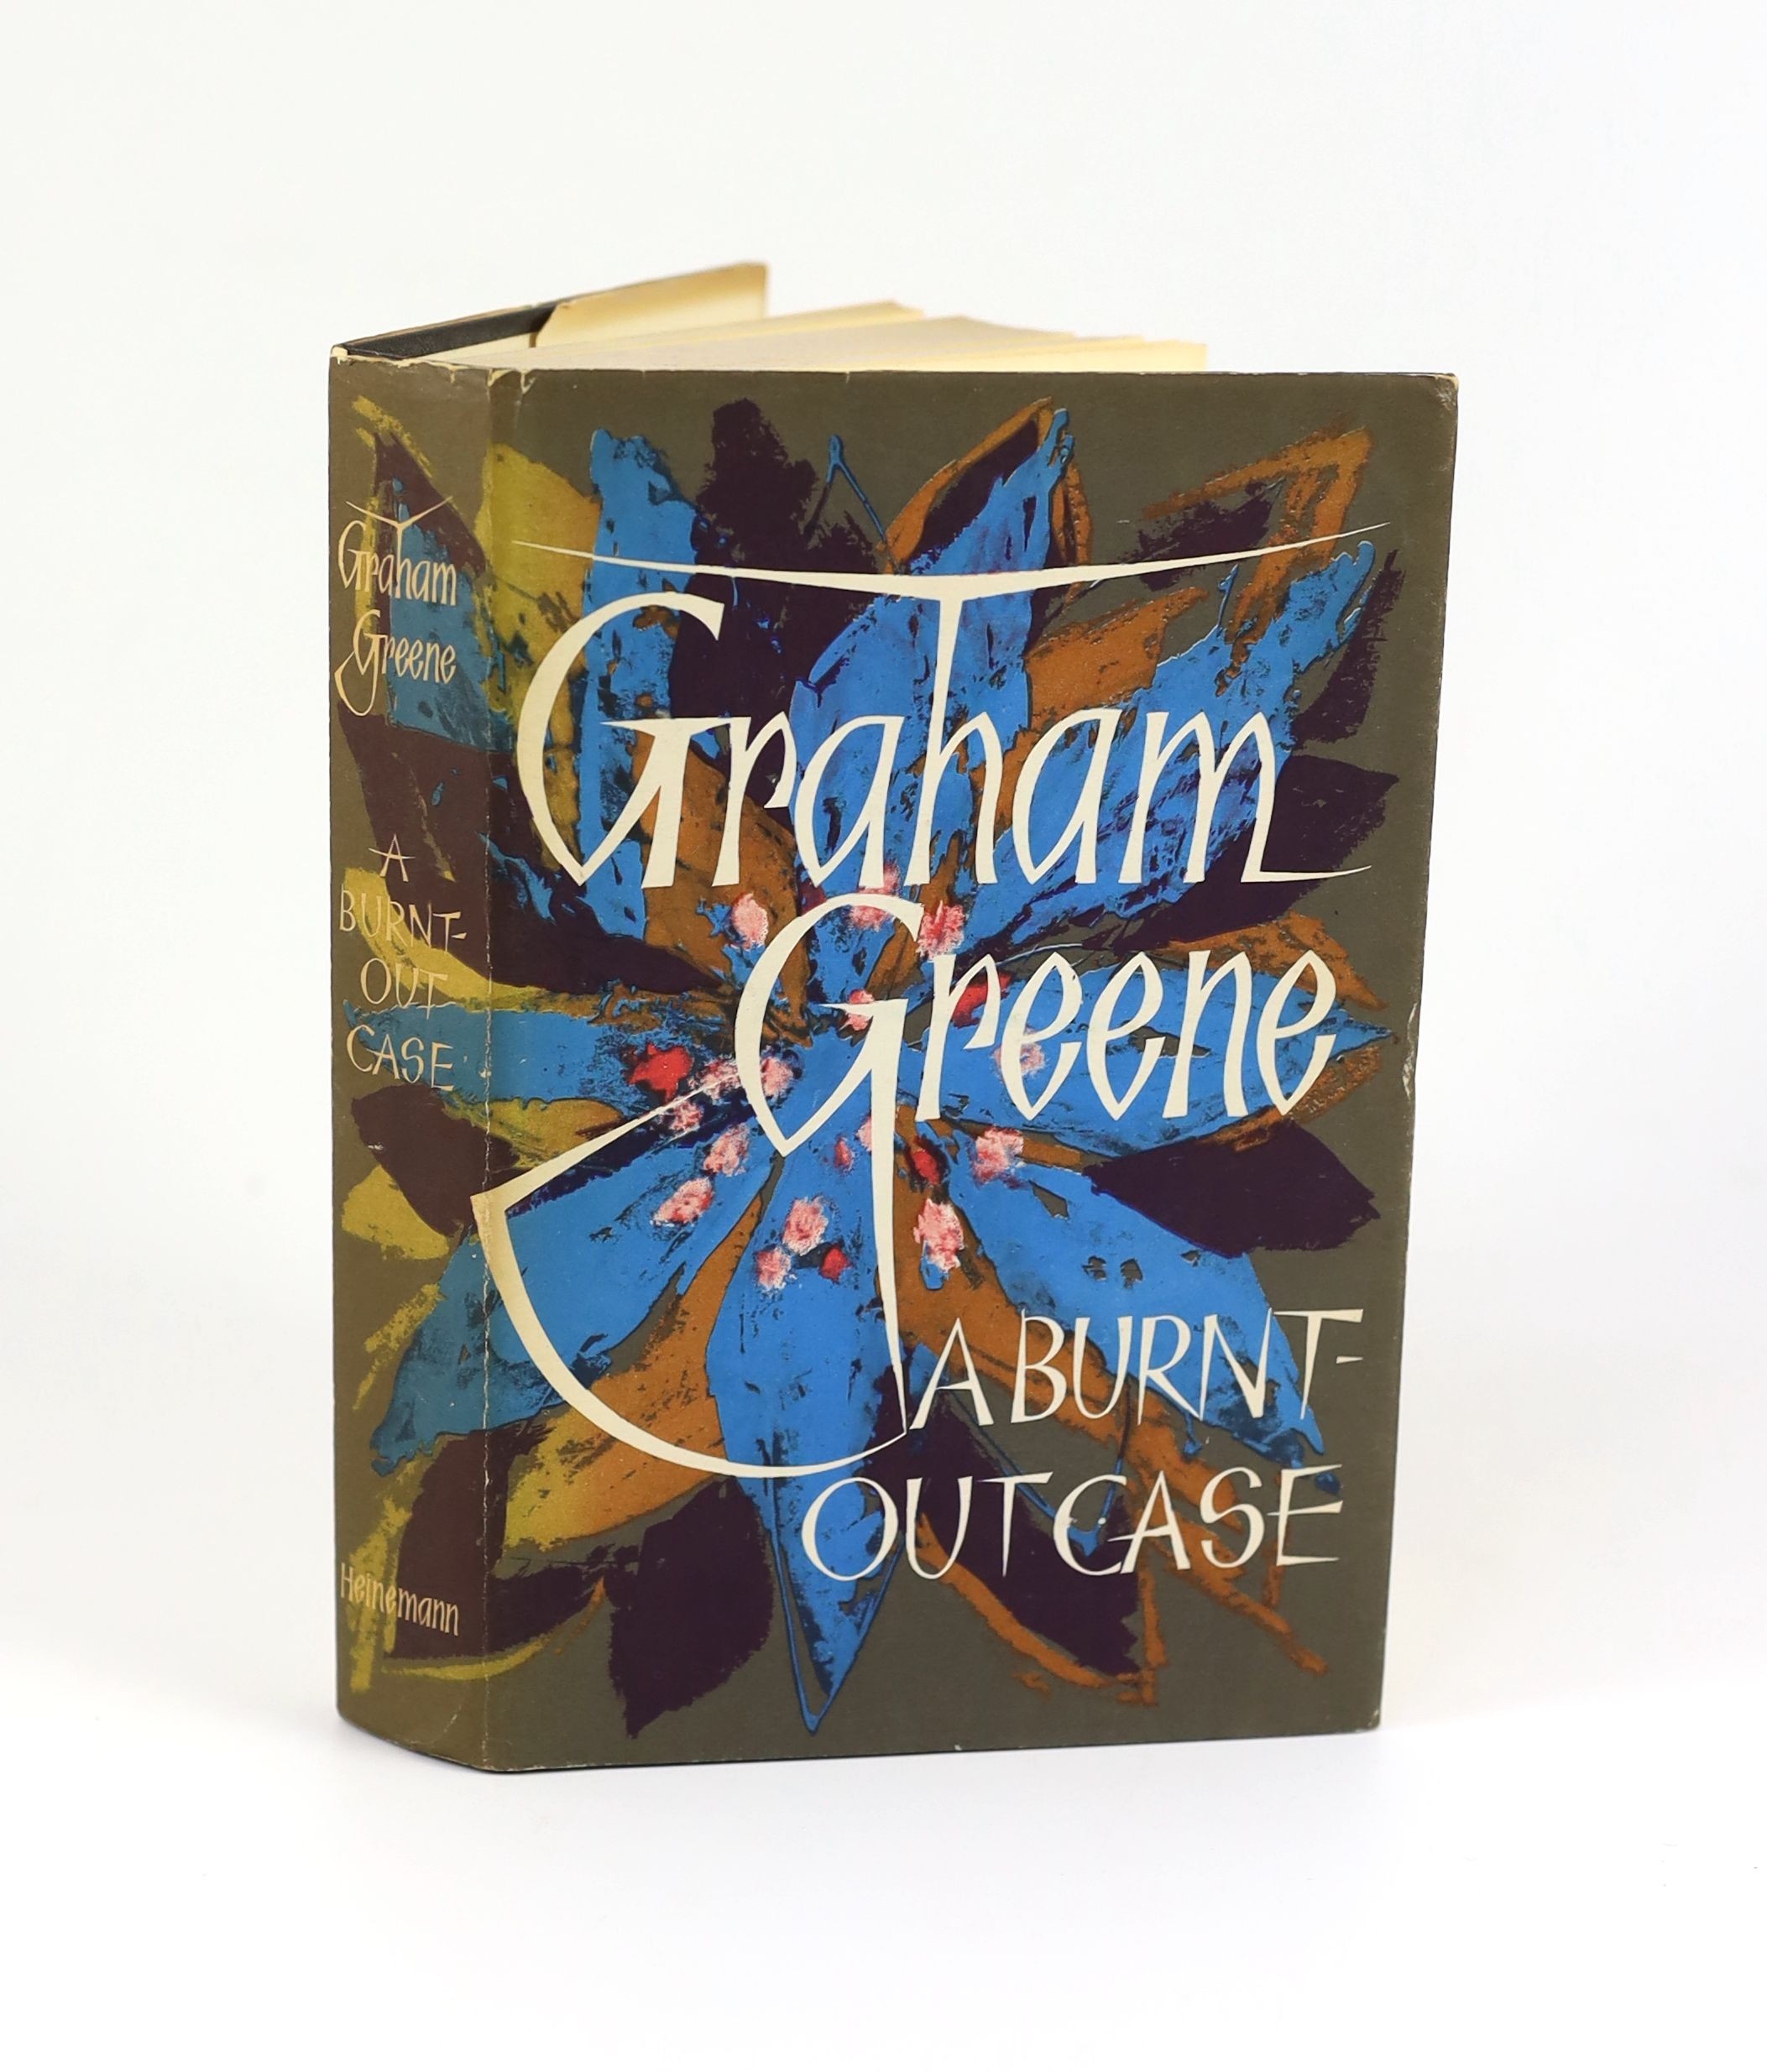 Greene, Graham - A Burnt-Out Case, 1st English edition, original cloth, in unclipped d/j, William Heinemann, London, 1961